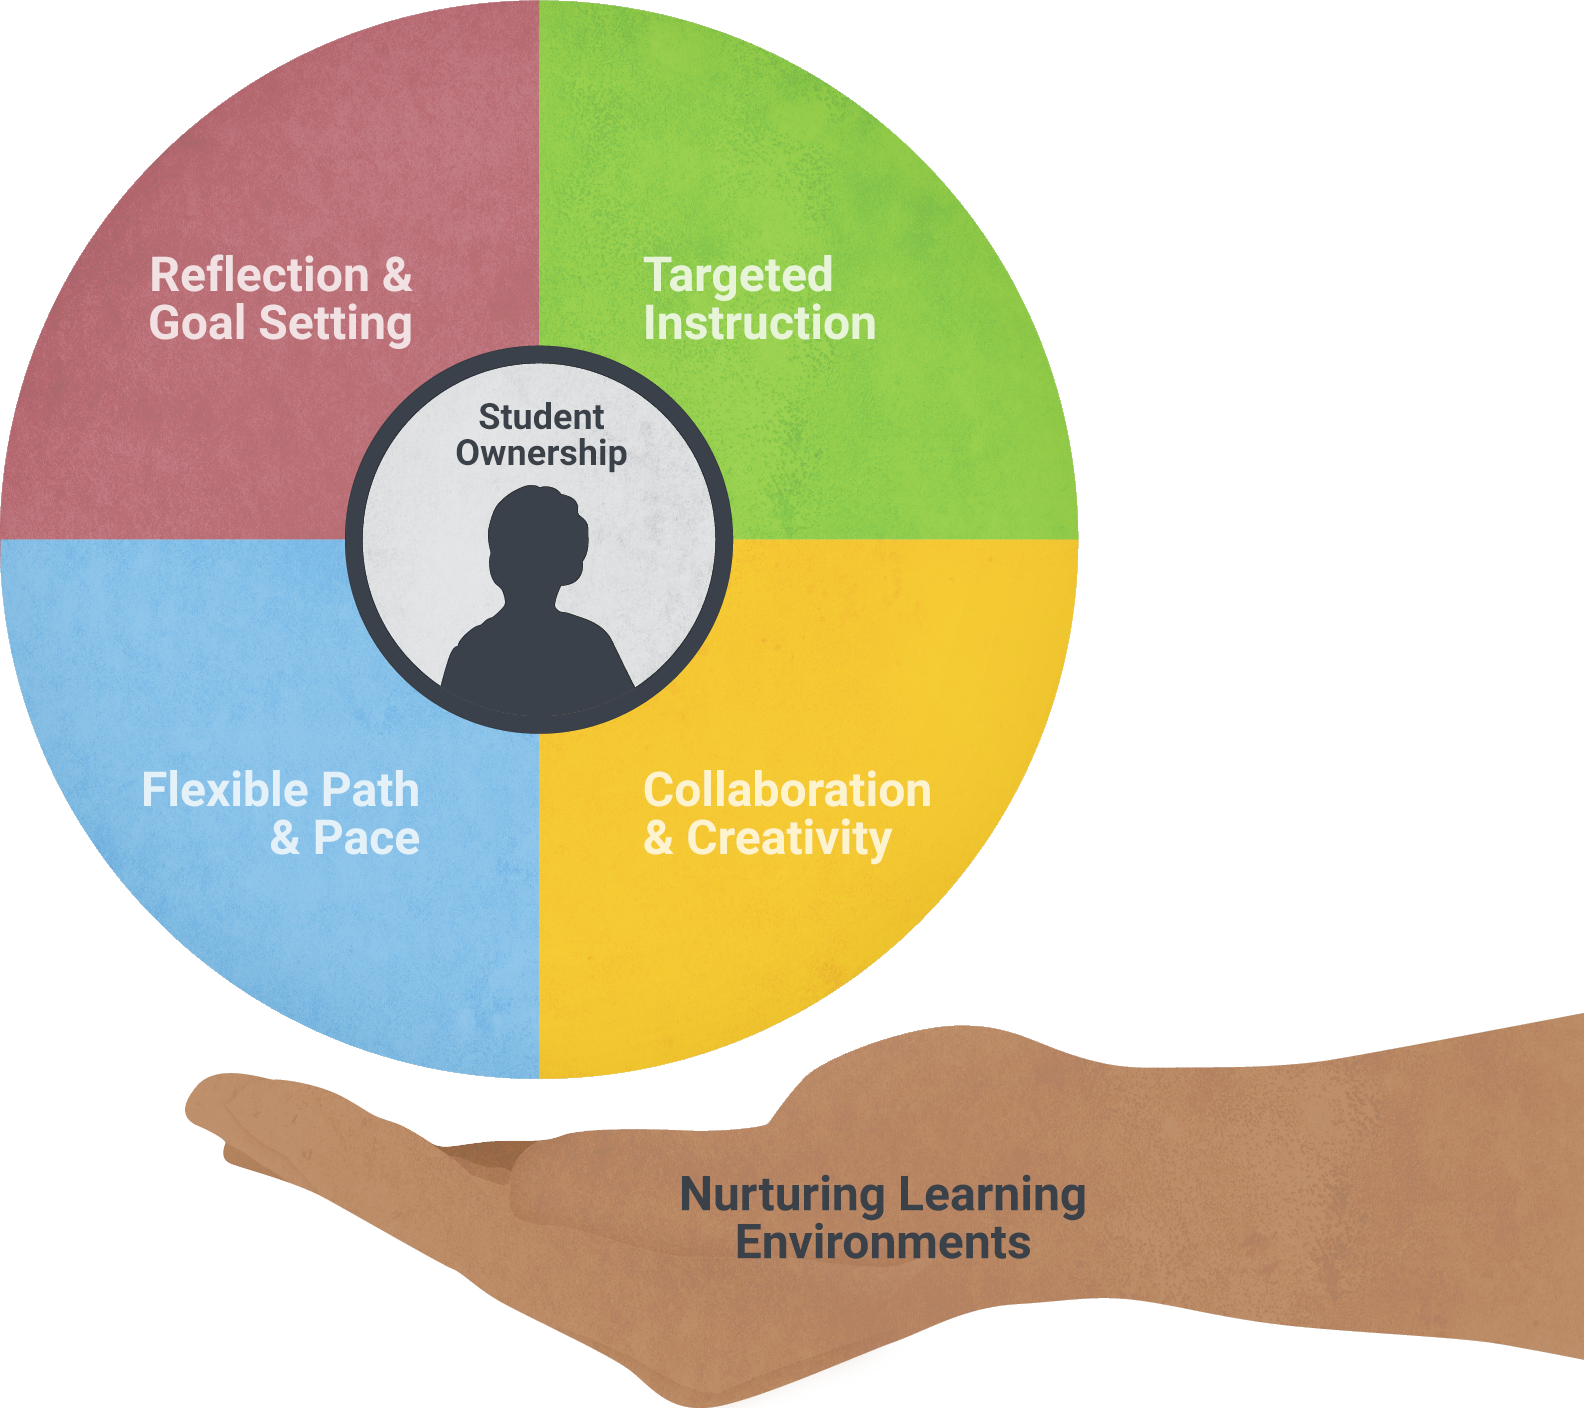 Personalized Learning Core Four Elements